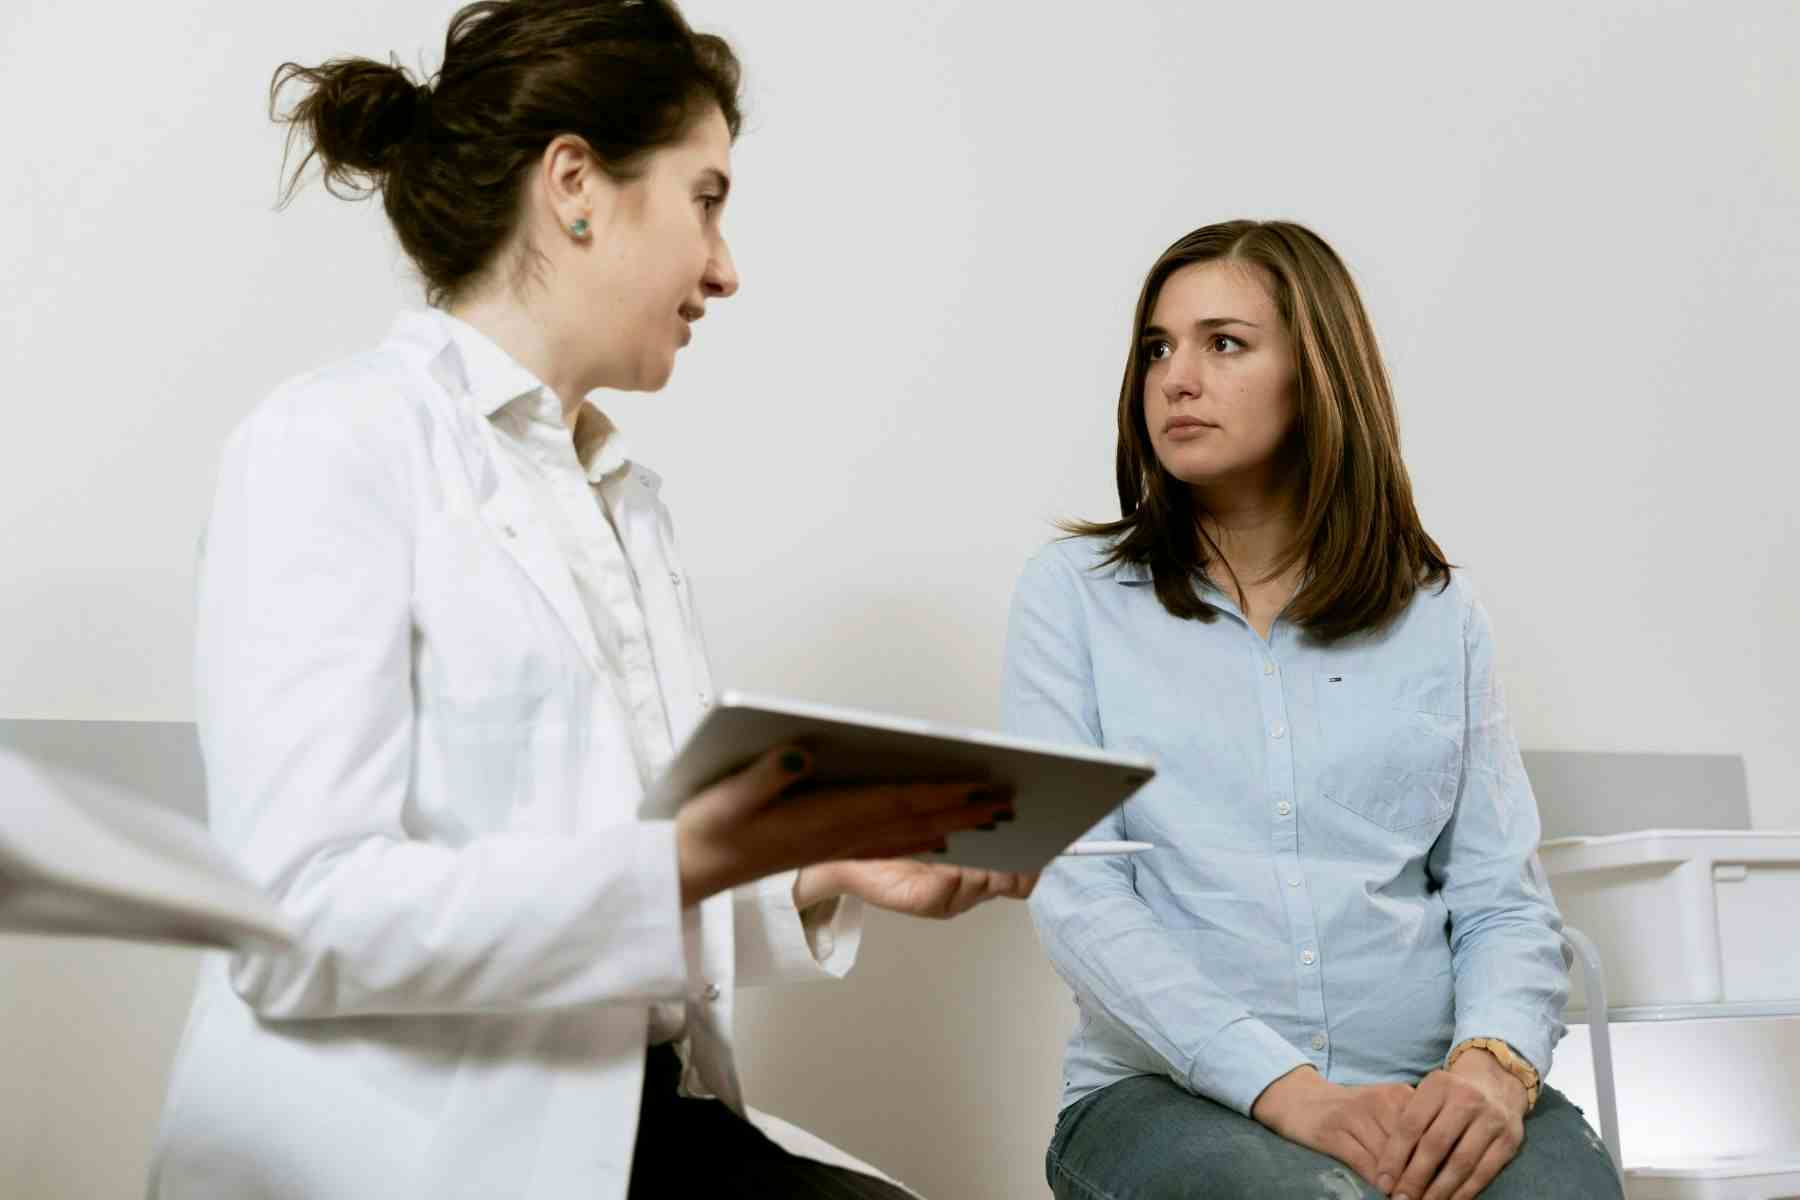 Doctor talking with female patient